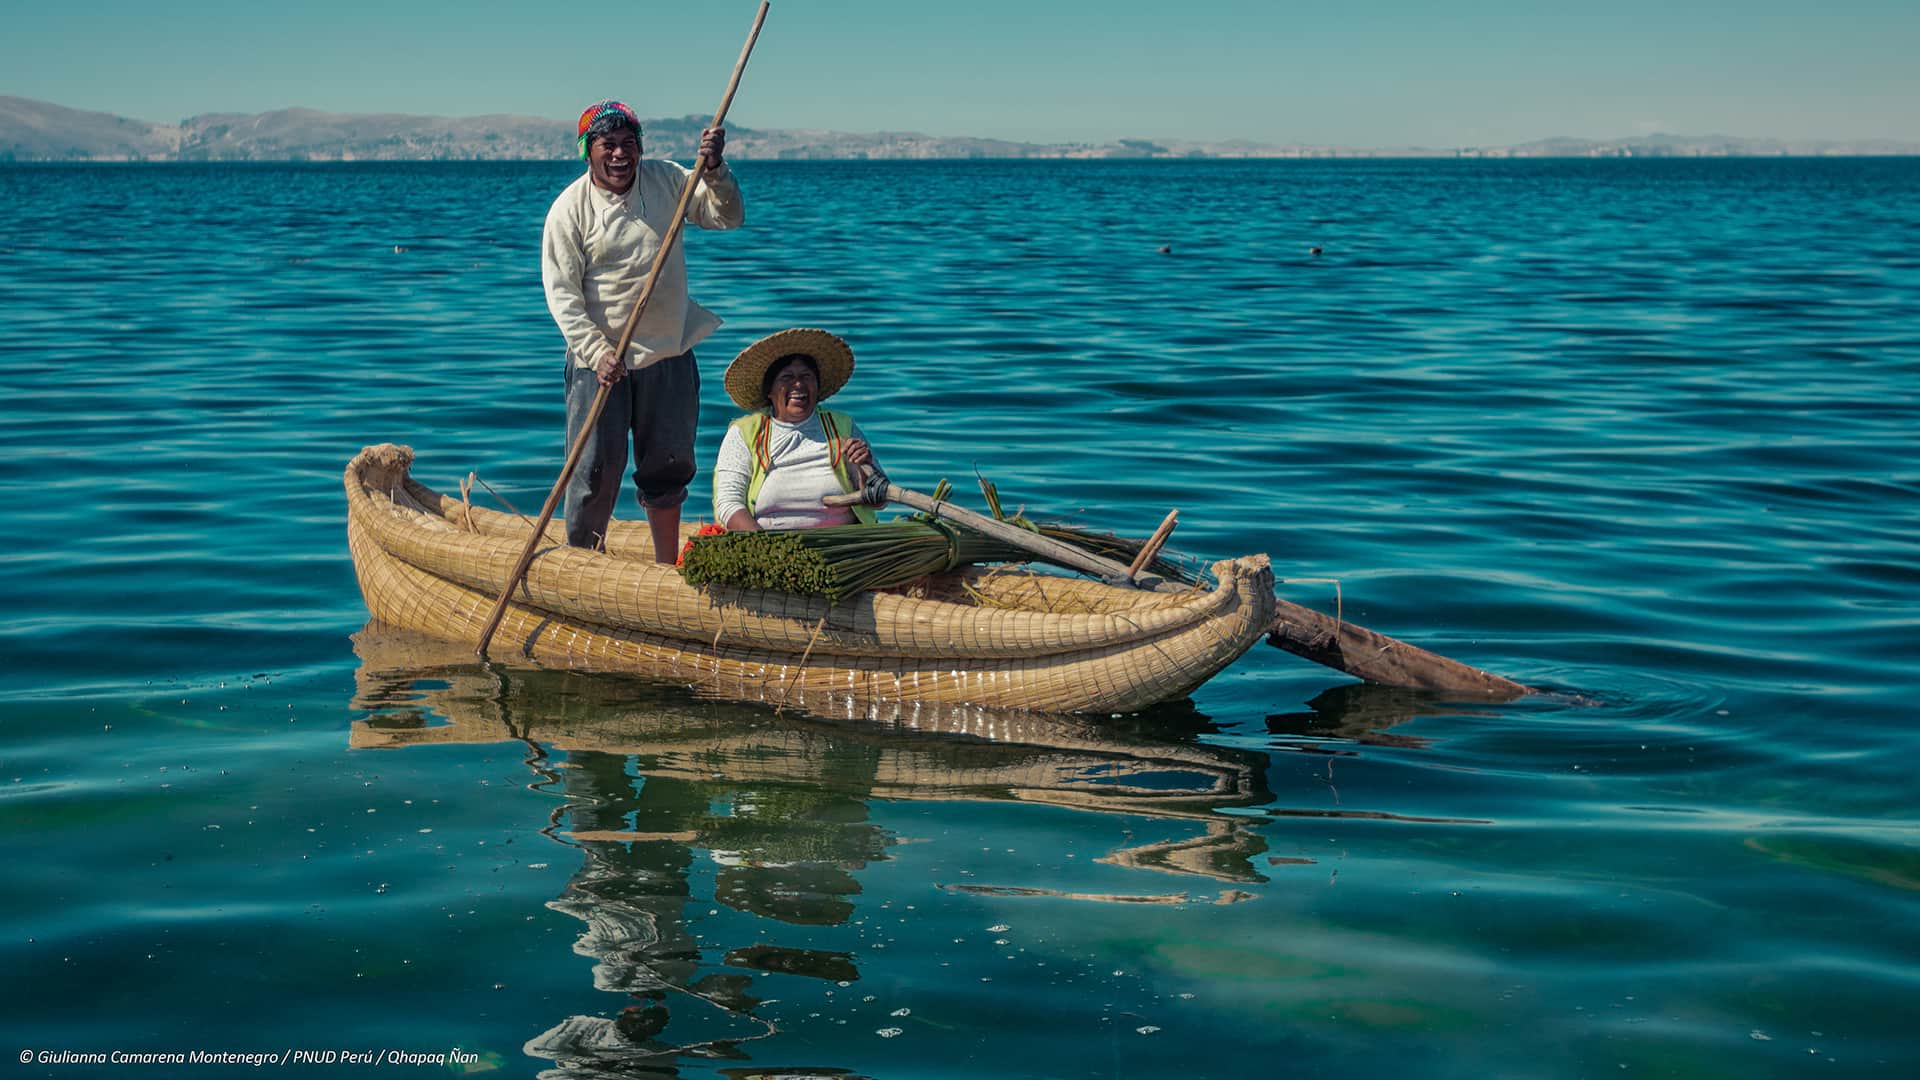 Man (paddeling) and woman (sitting) on a reed boat while navigating over the water | Responsible Travel Peru